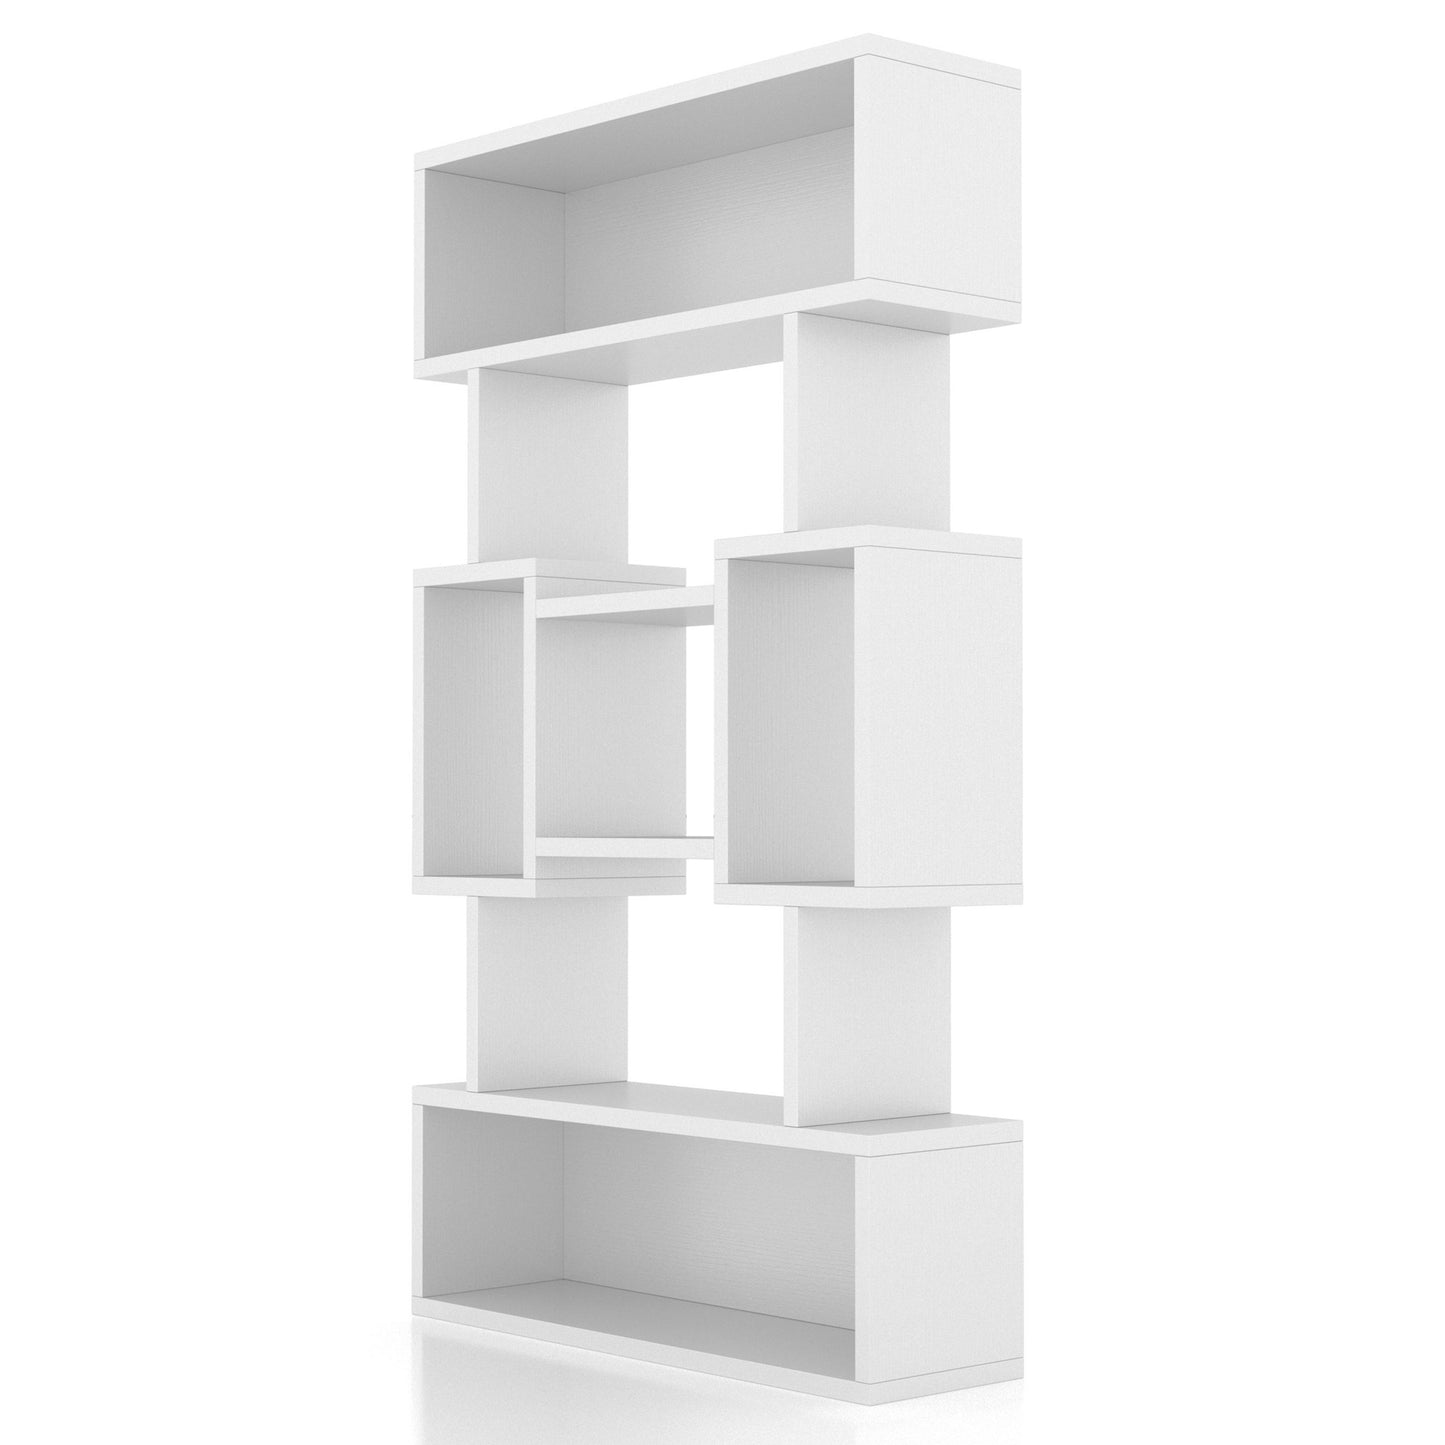 Left angled modern white open cubic bookcase display shelf on a white background